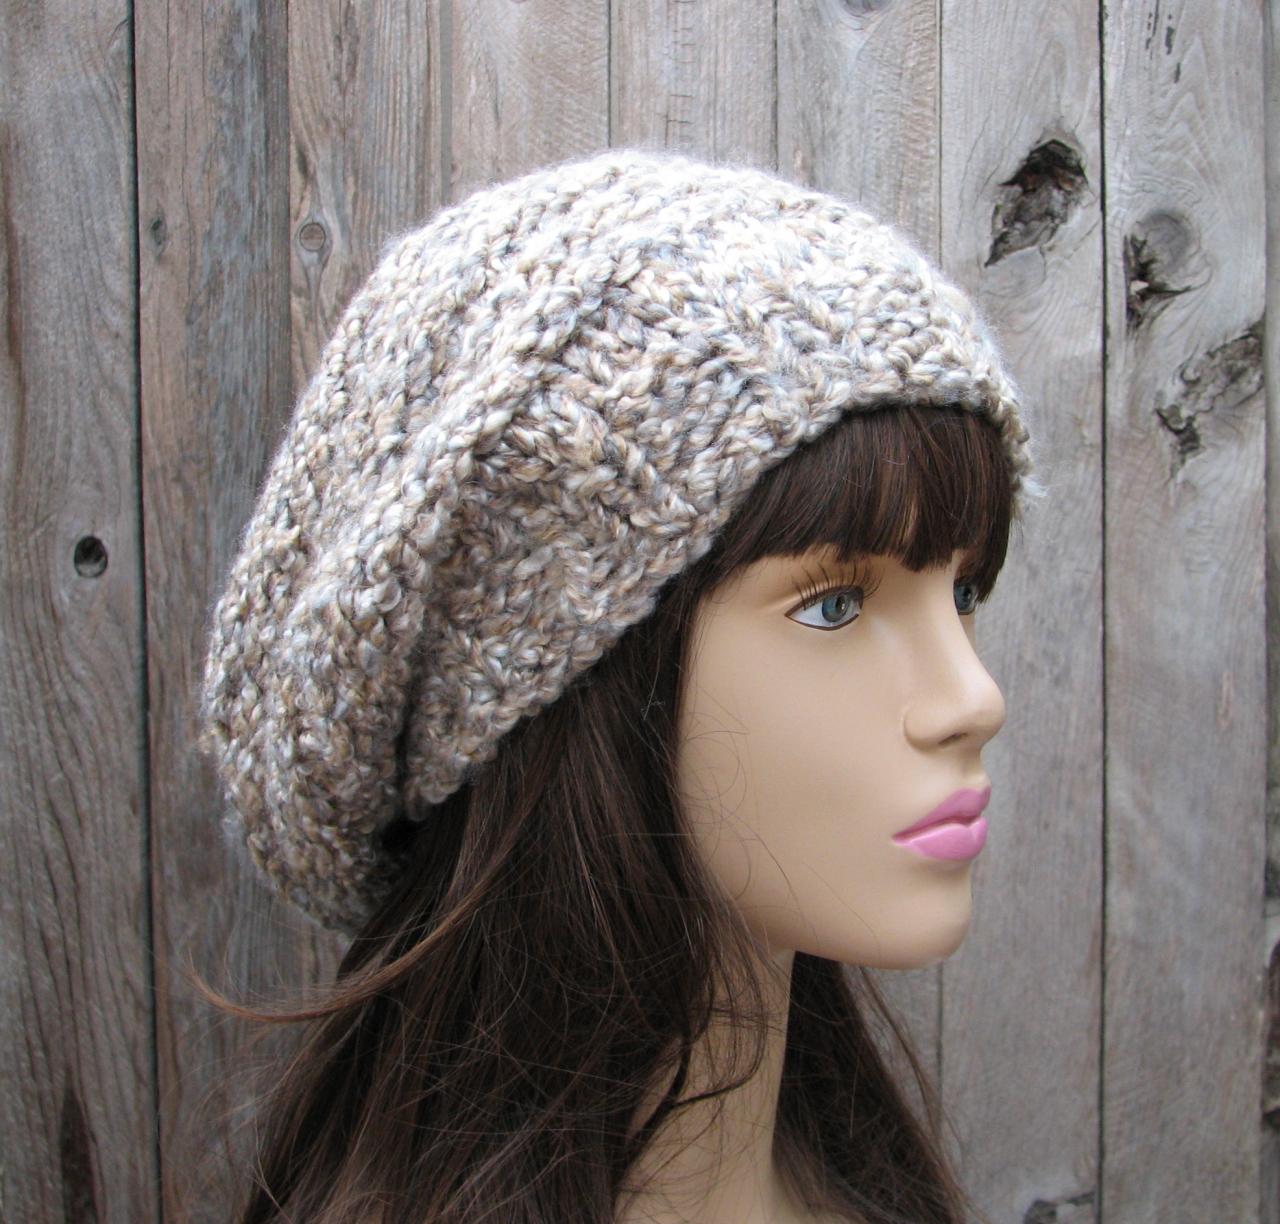 Crochet Hat - Slouchy Hat -multicolored - Winter Accessories Autumn Accessories Fall Fashion